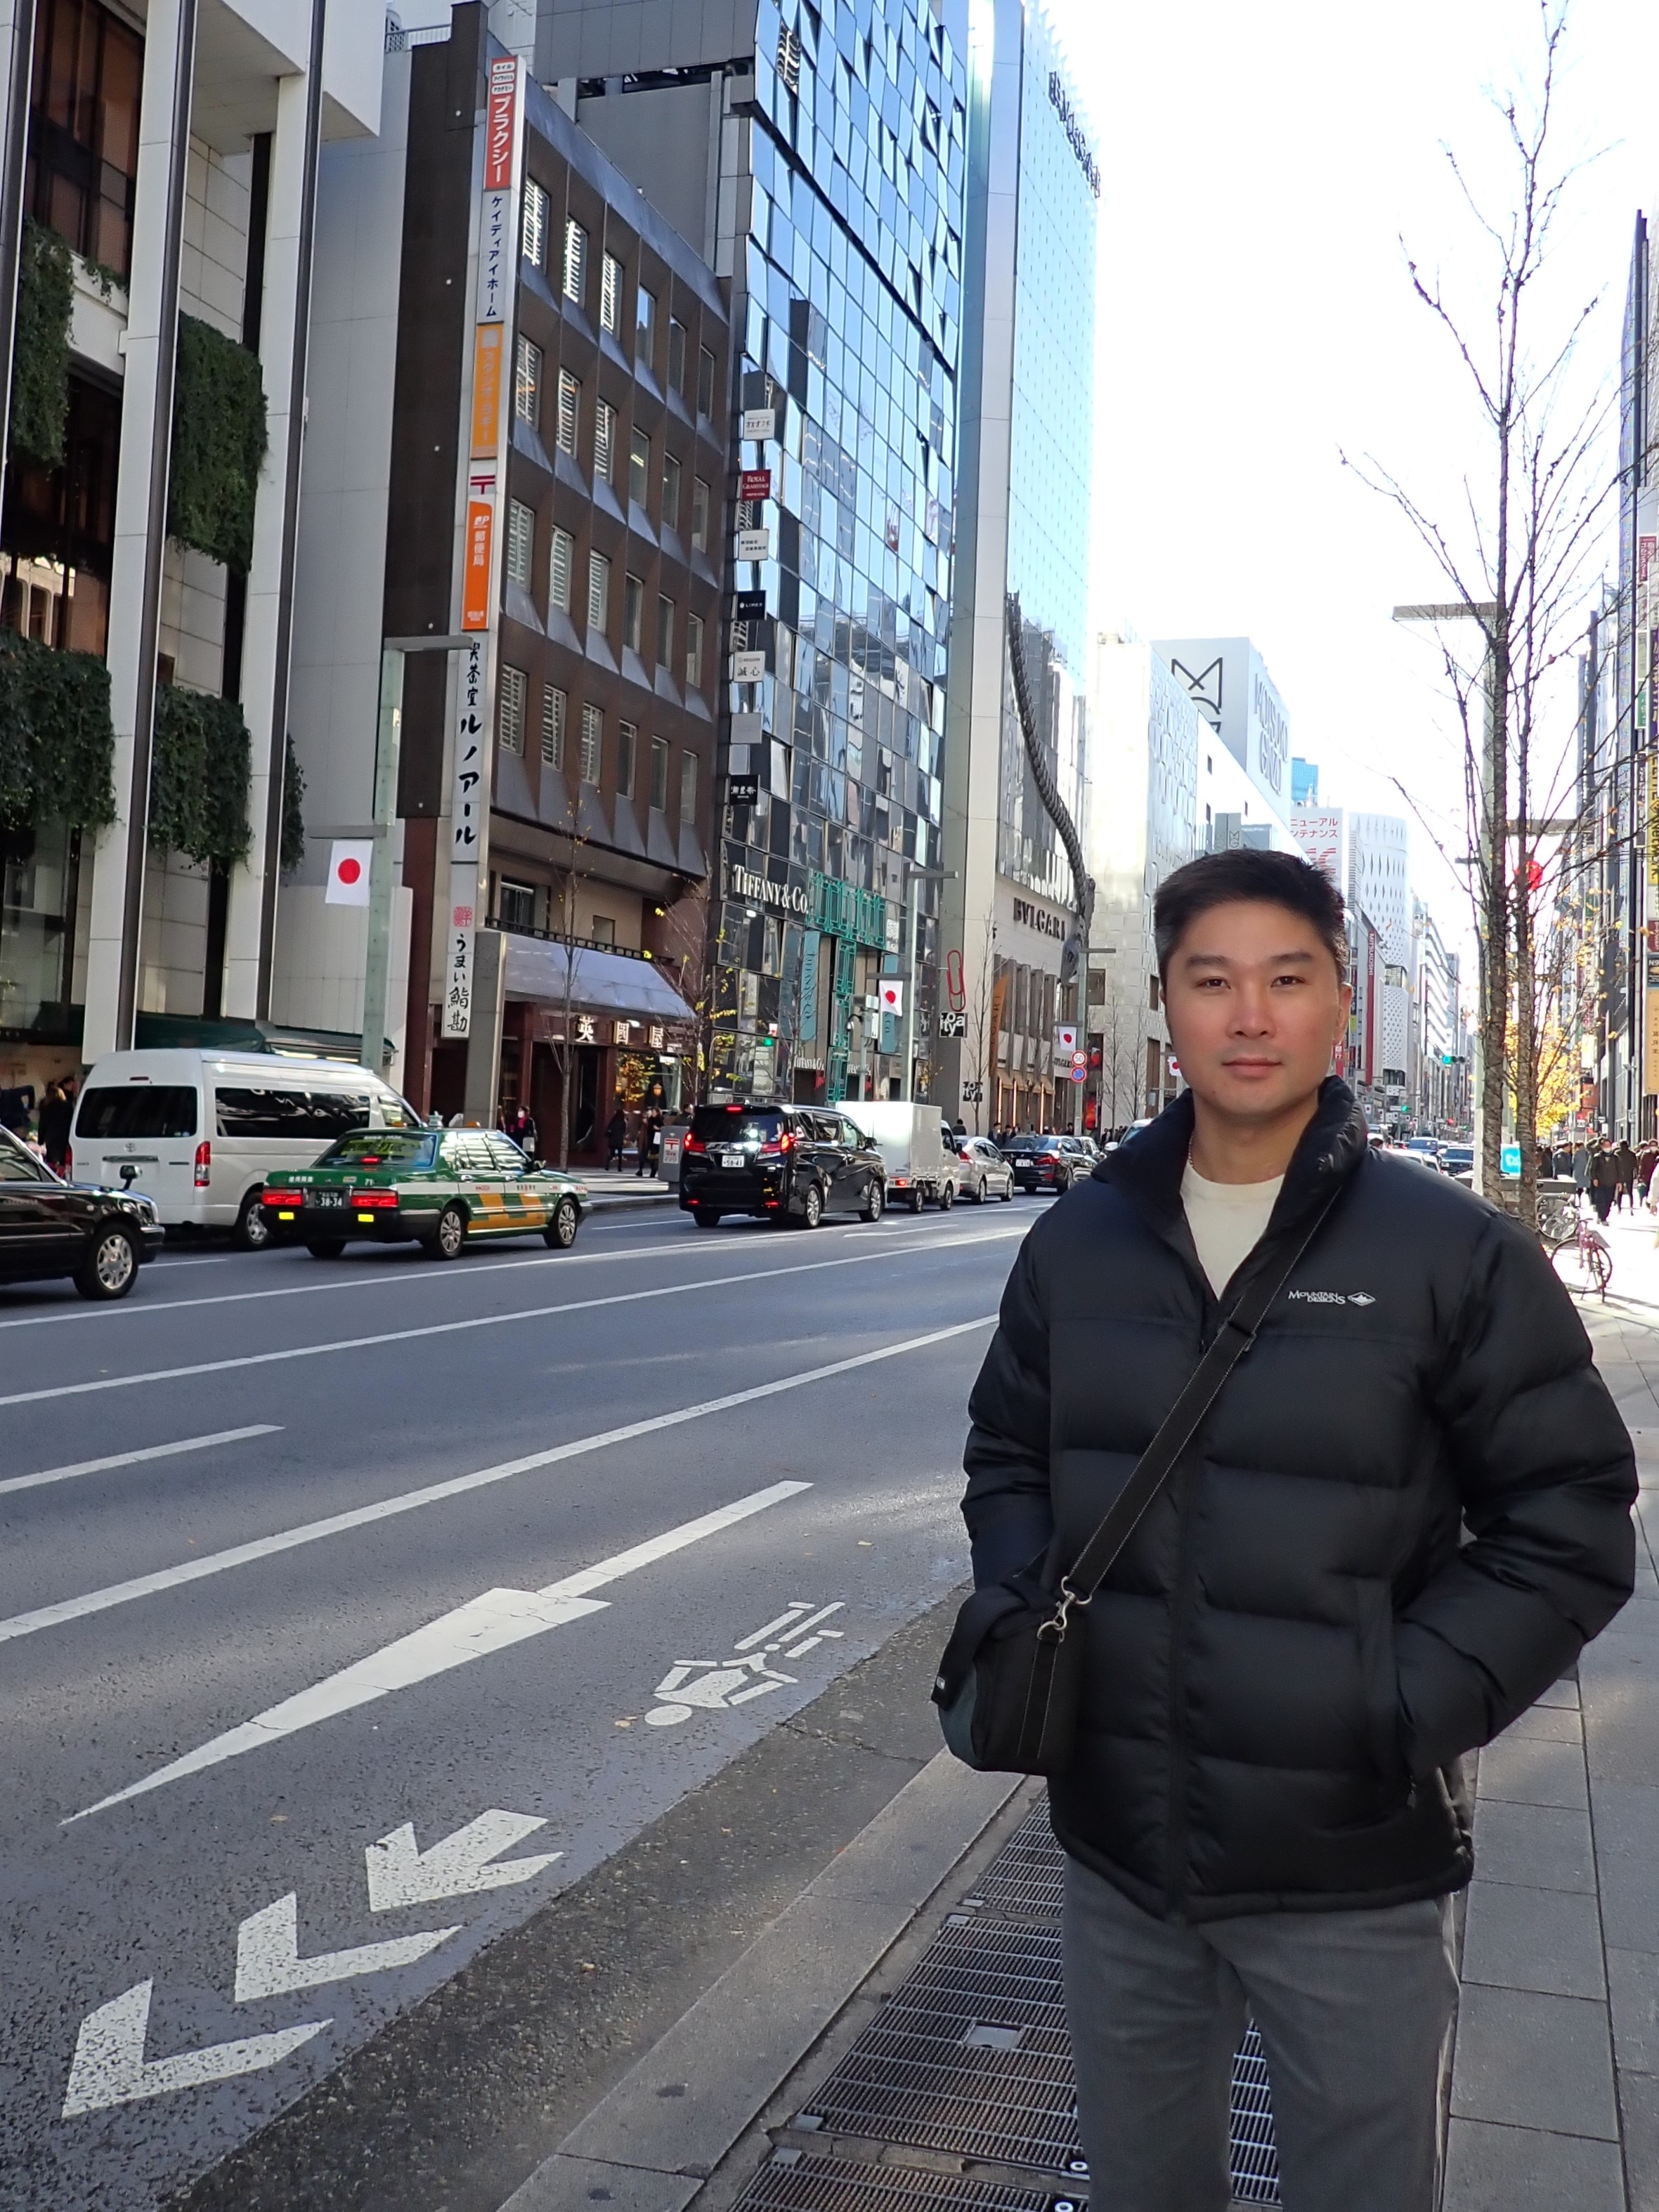 Japan is Issac Huynh's favourite place to visit.